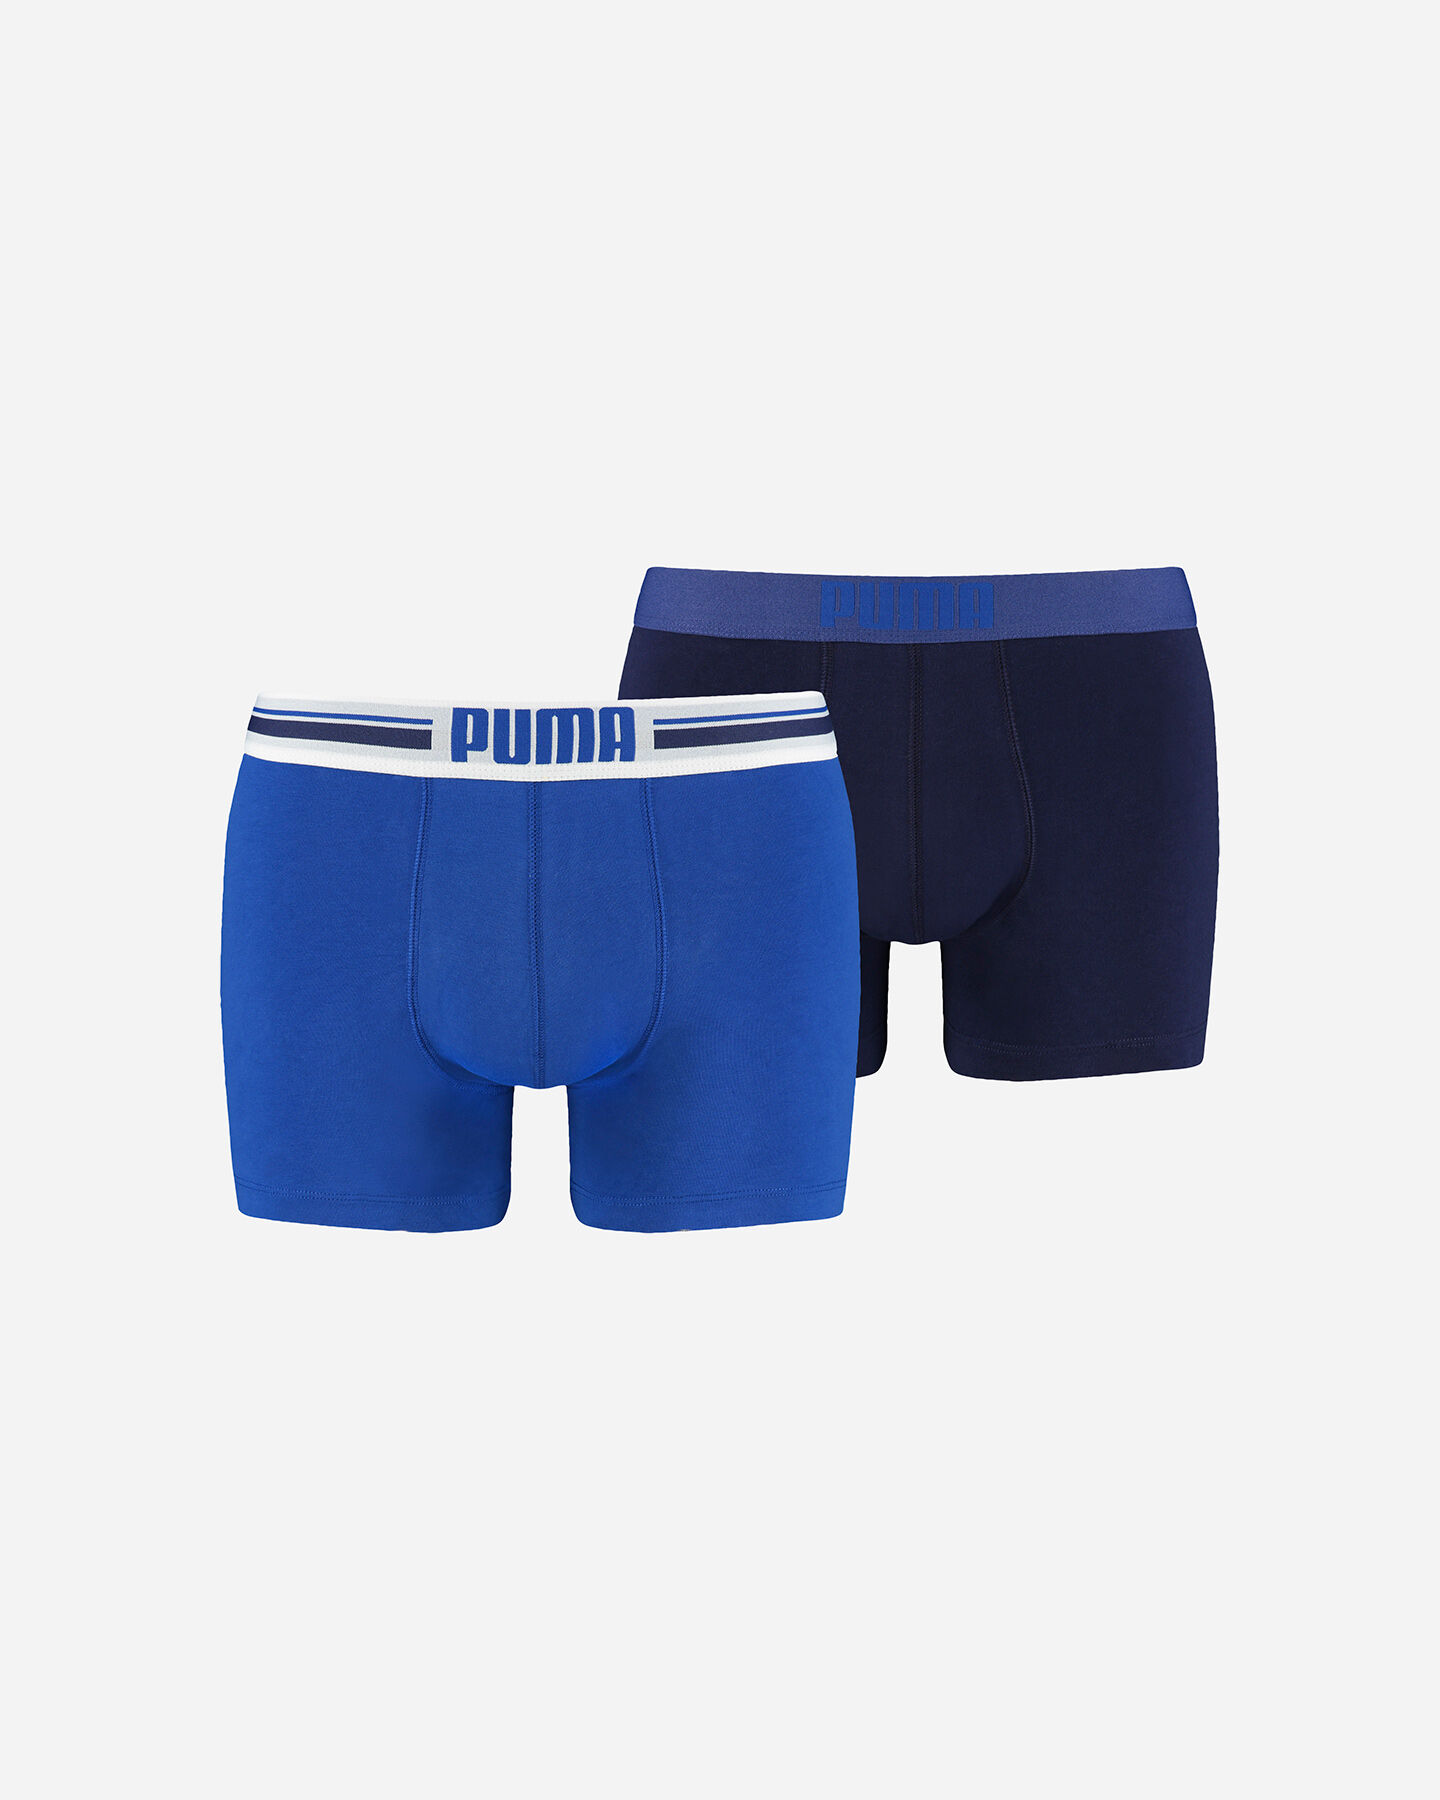  Intimo PUMA PLACED 2PACK M S1312531|1|S scatto 0